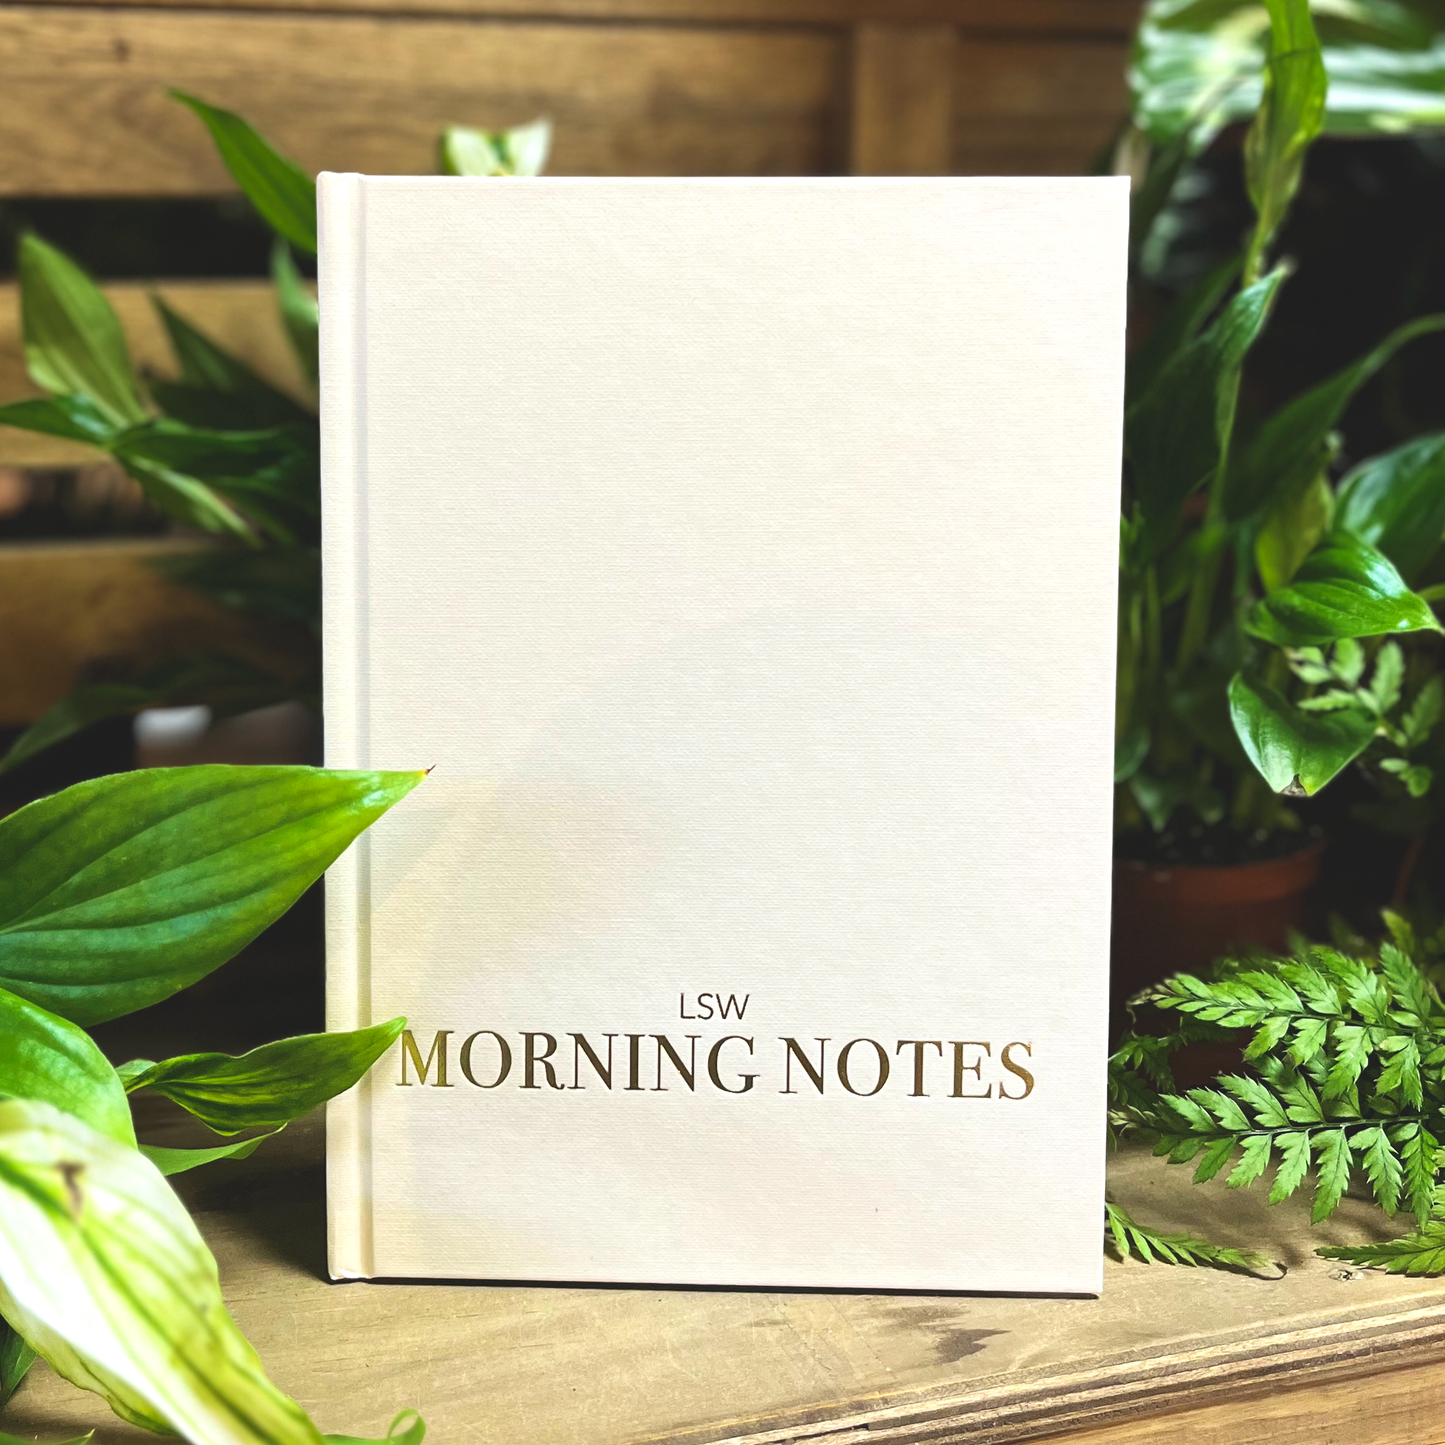 Morning Notes: Wellbeing Journal | Christmas Gift